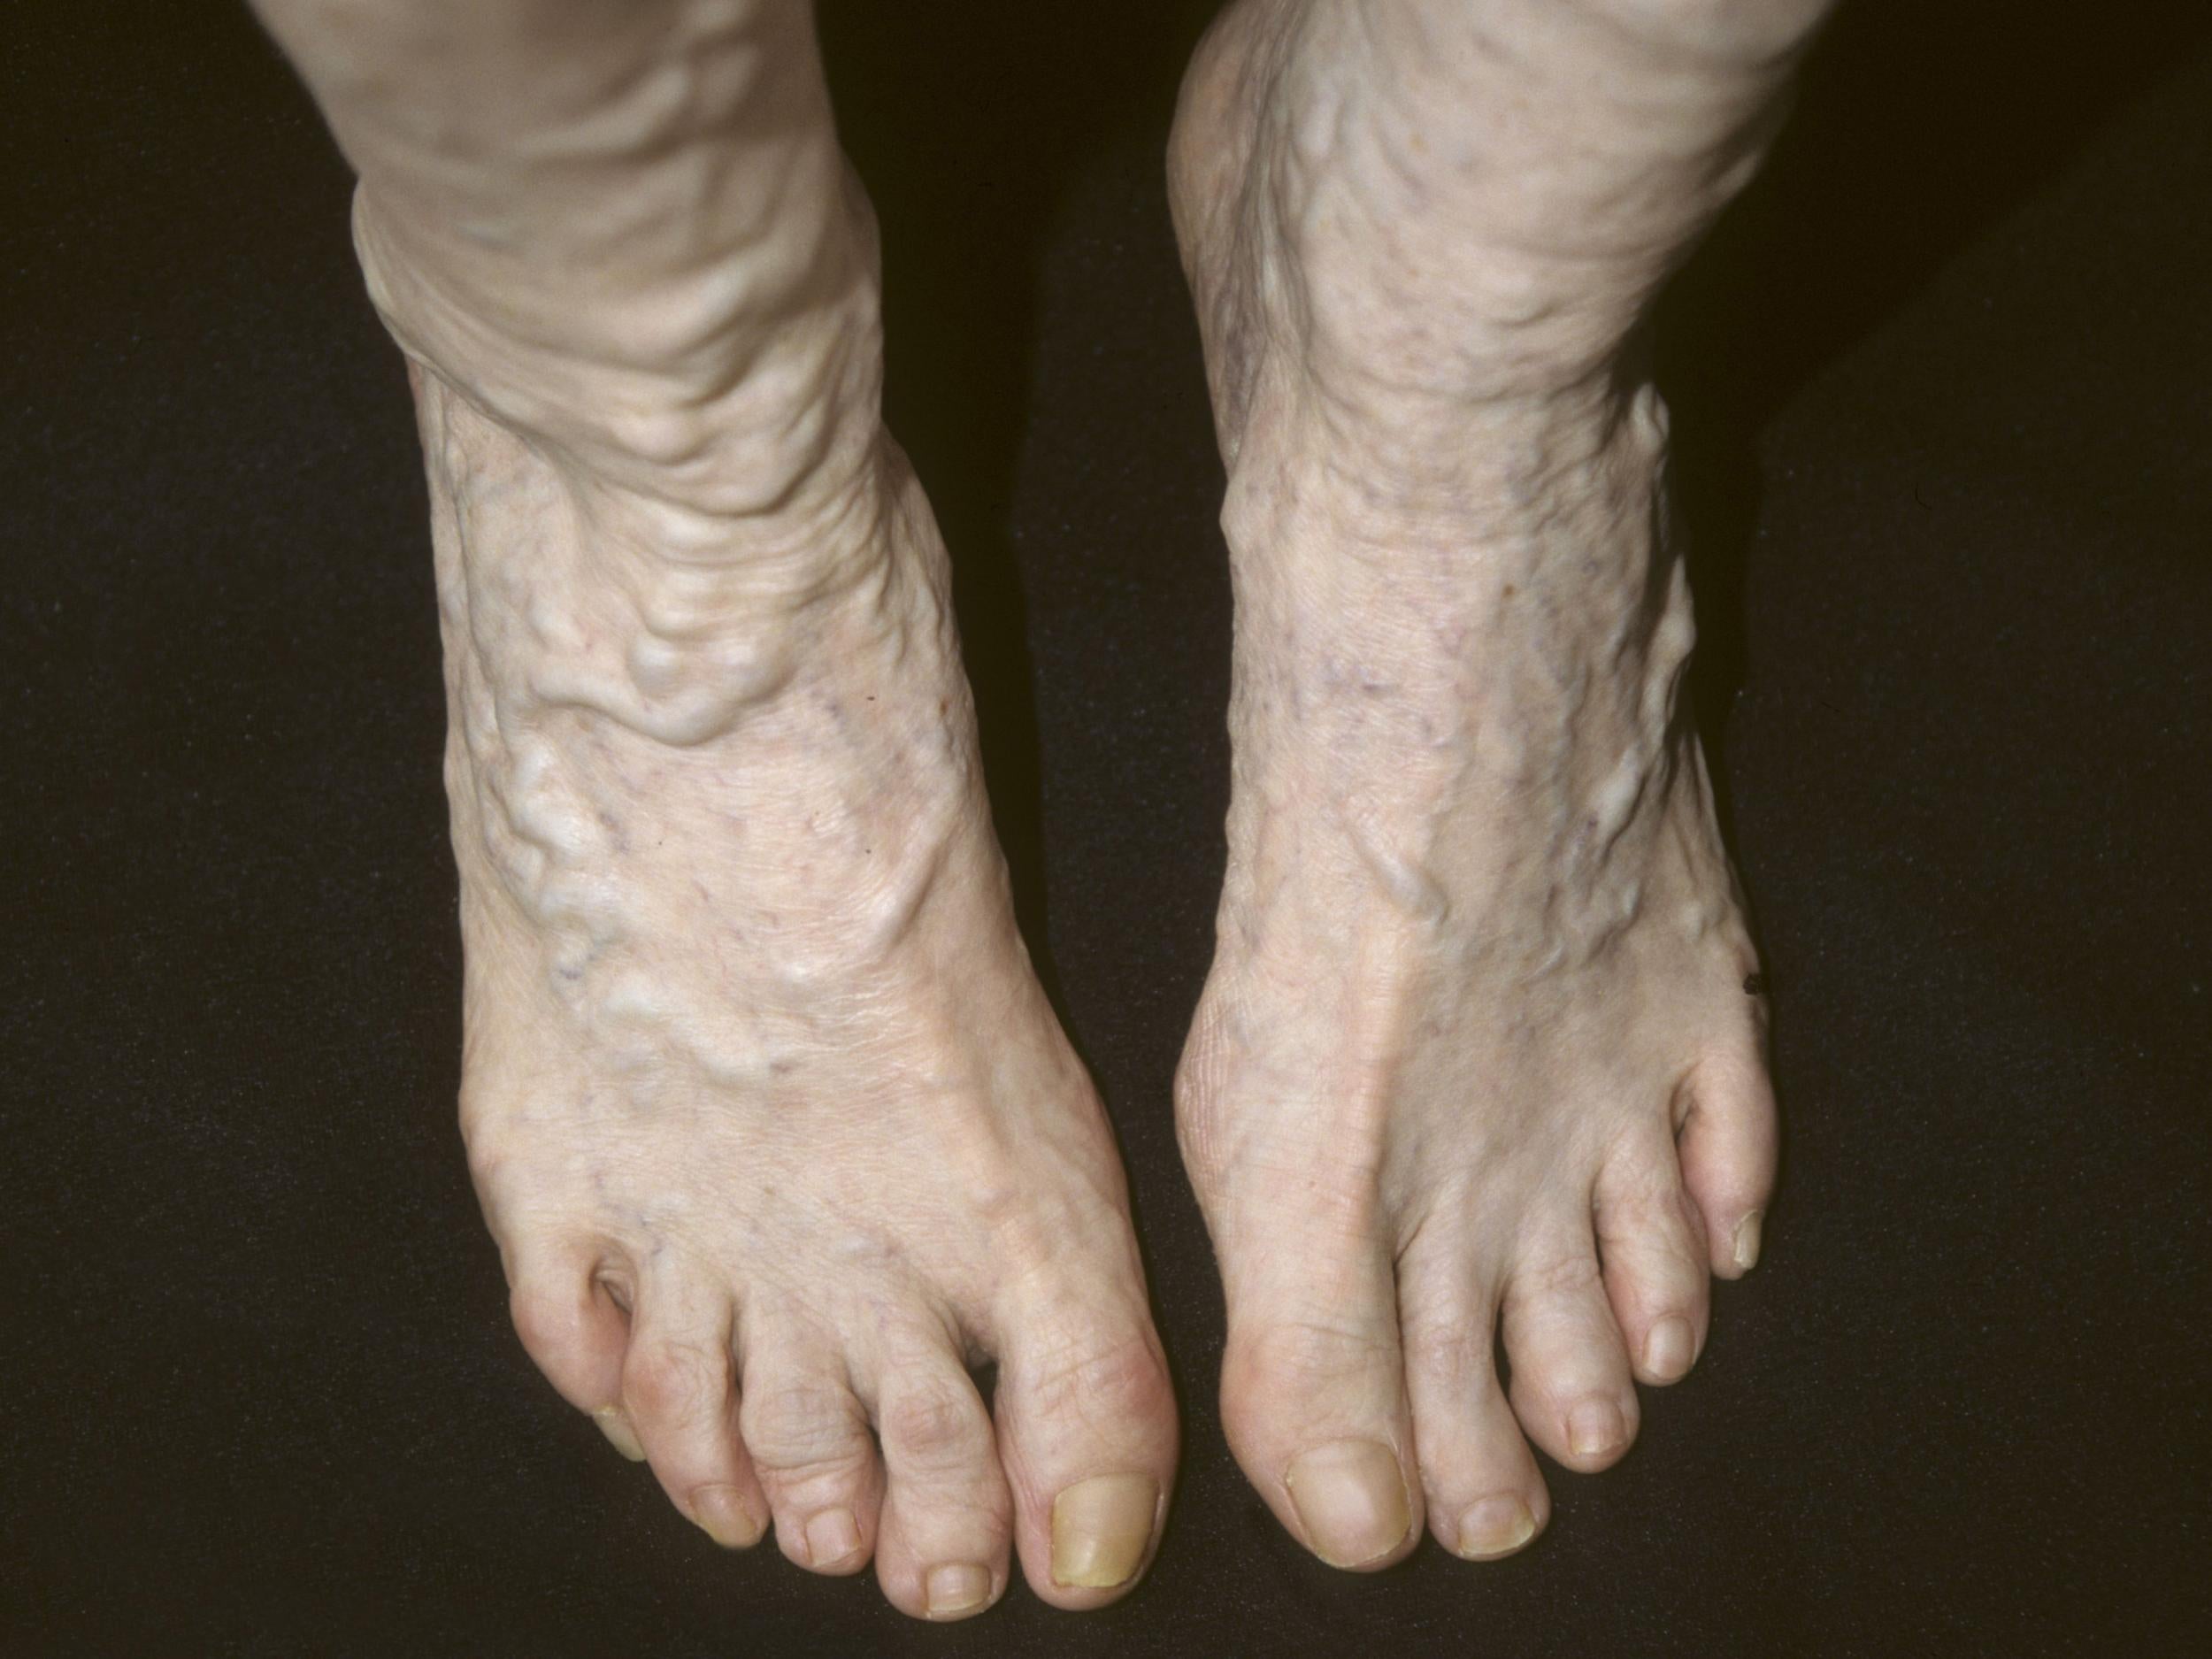 Varicose veins are a problem commonly associated with old age (Rex)